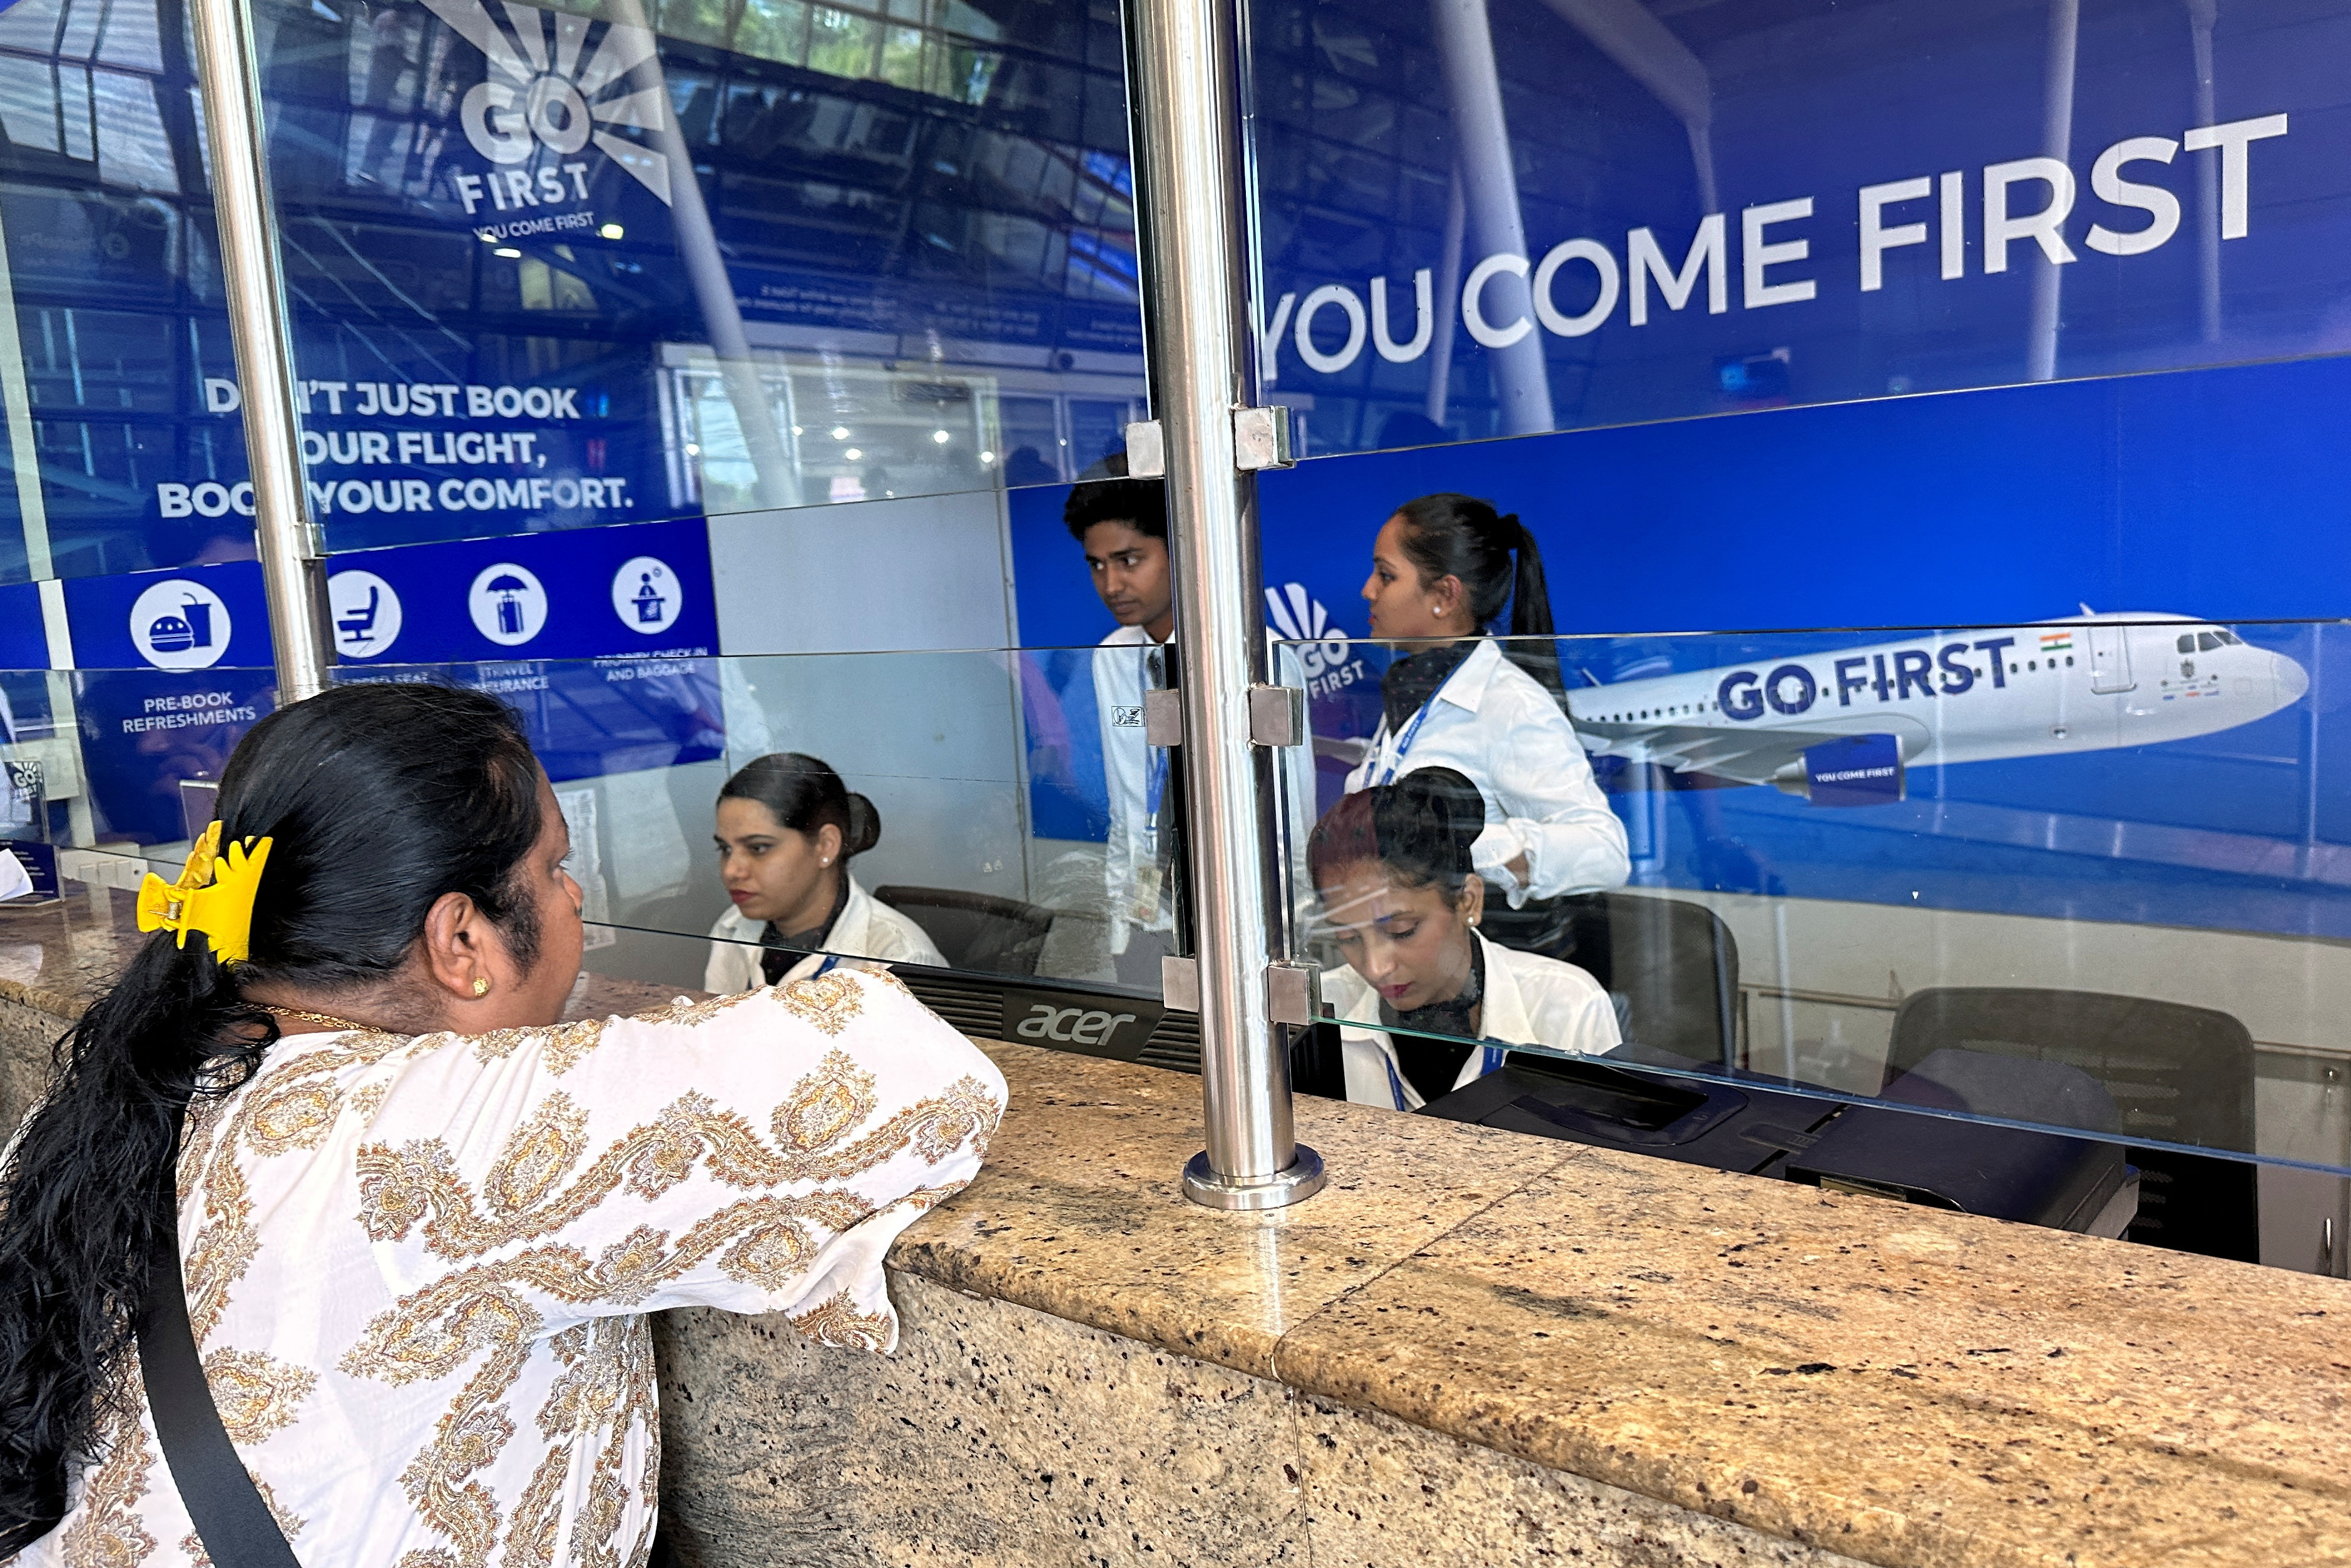 A woman speaks to staff at the Go First airline ticketing counter at the Chhatrapati Shivaji International Airport in Mumbai